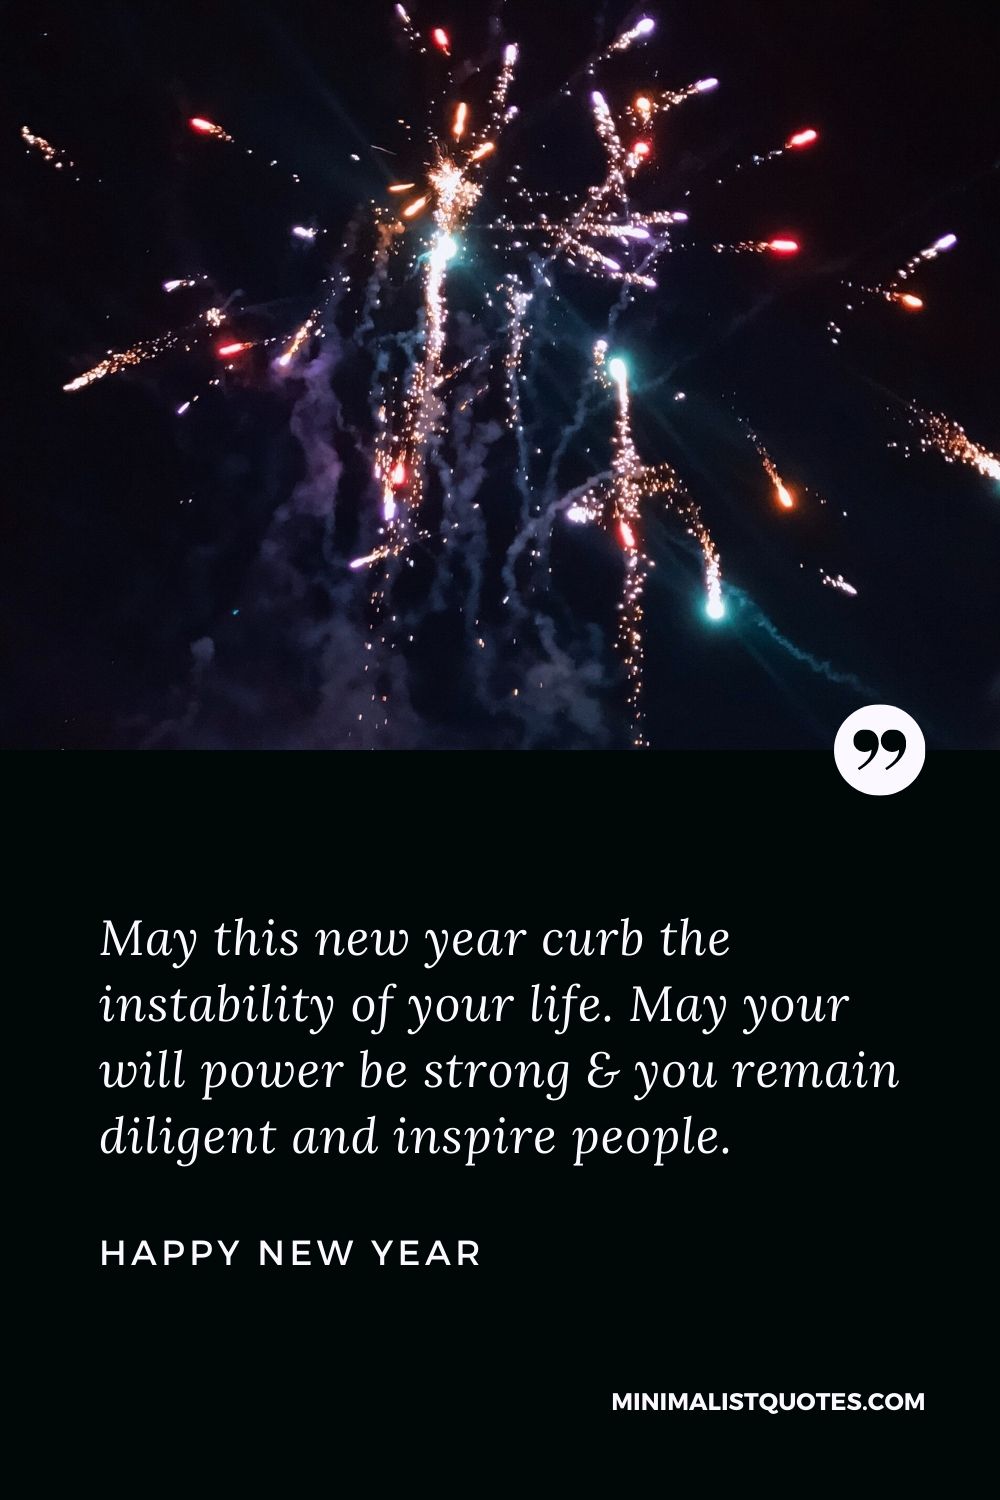 New Year Wish - May this new year curb the instability of your life. May your will power be strong & you remain diligent and inspire people.